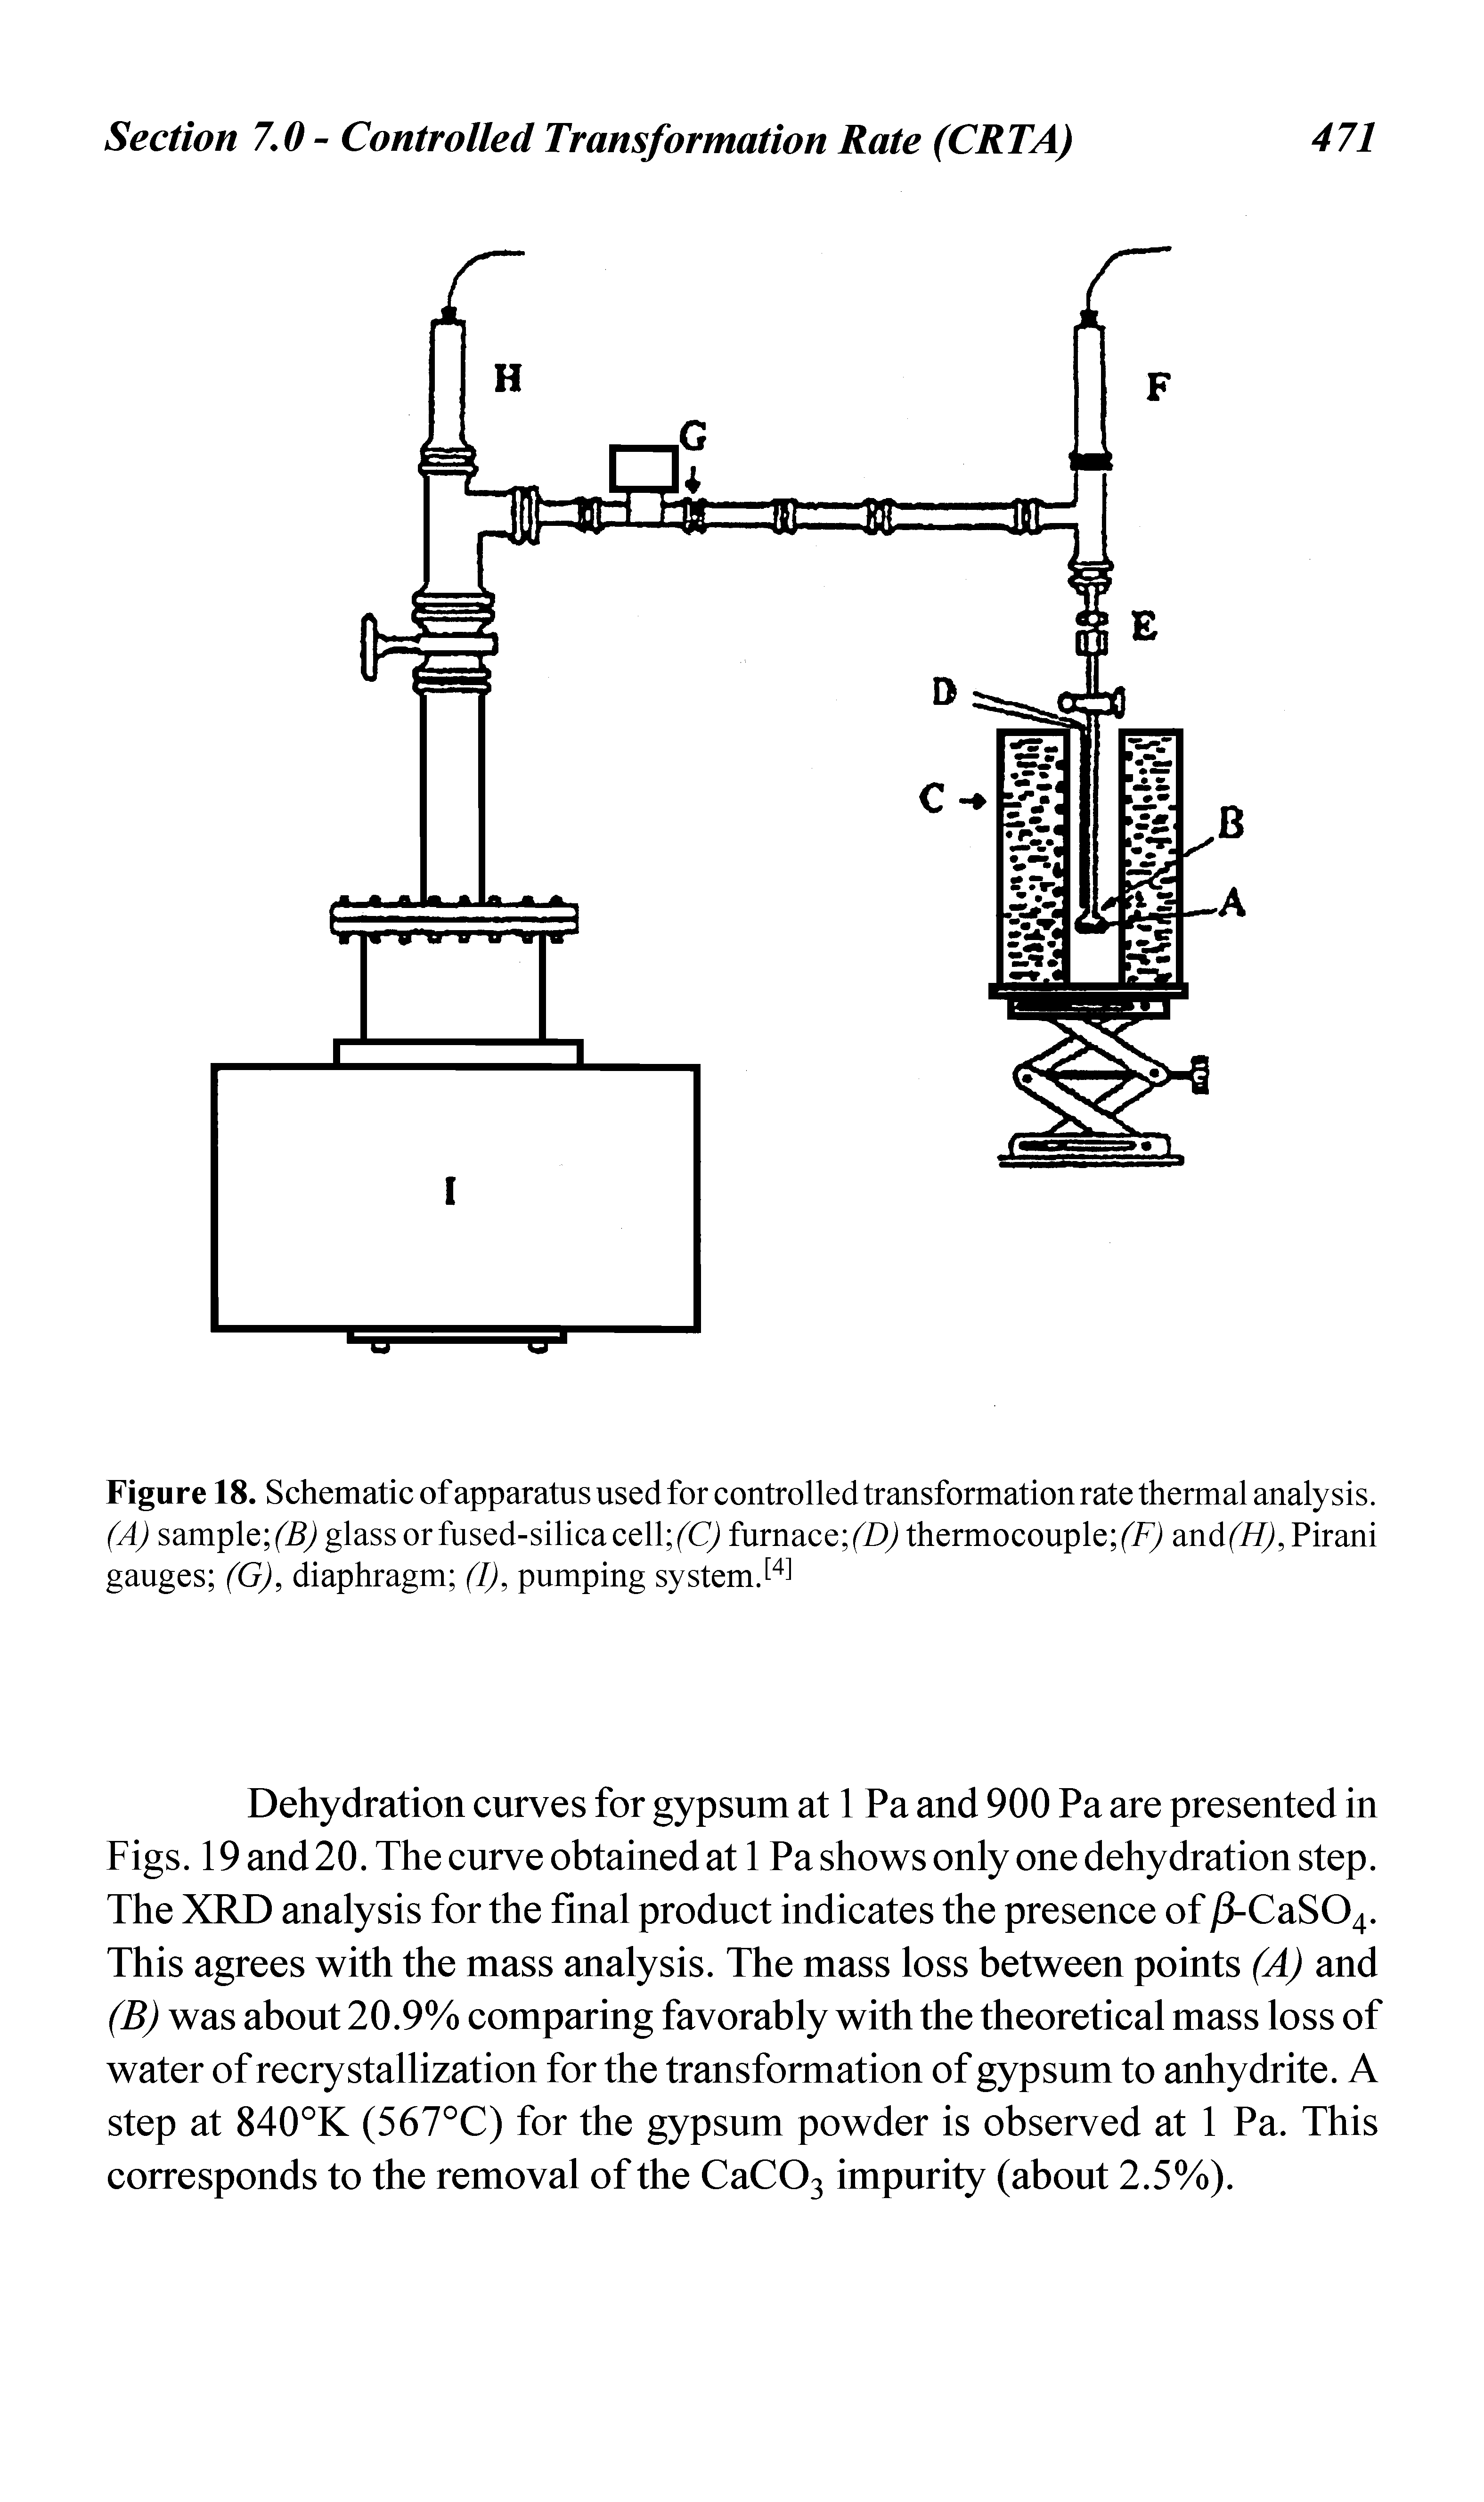 Figure 18. Schematic of apparatus used for controlled transformation rate thermal analysis. (A) sample ( 5 glass orfused-silicacell ( Q furnace fDj thermocouple f ) andfT/), Pirani gauges (G), diaphragm (I), pumping system. ]...